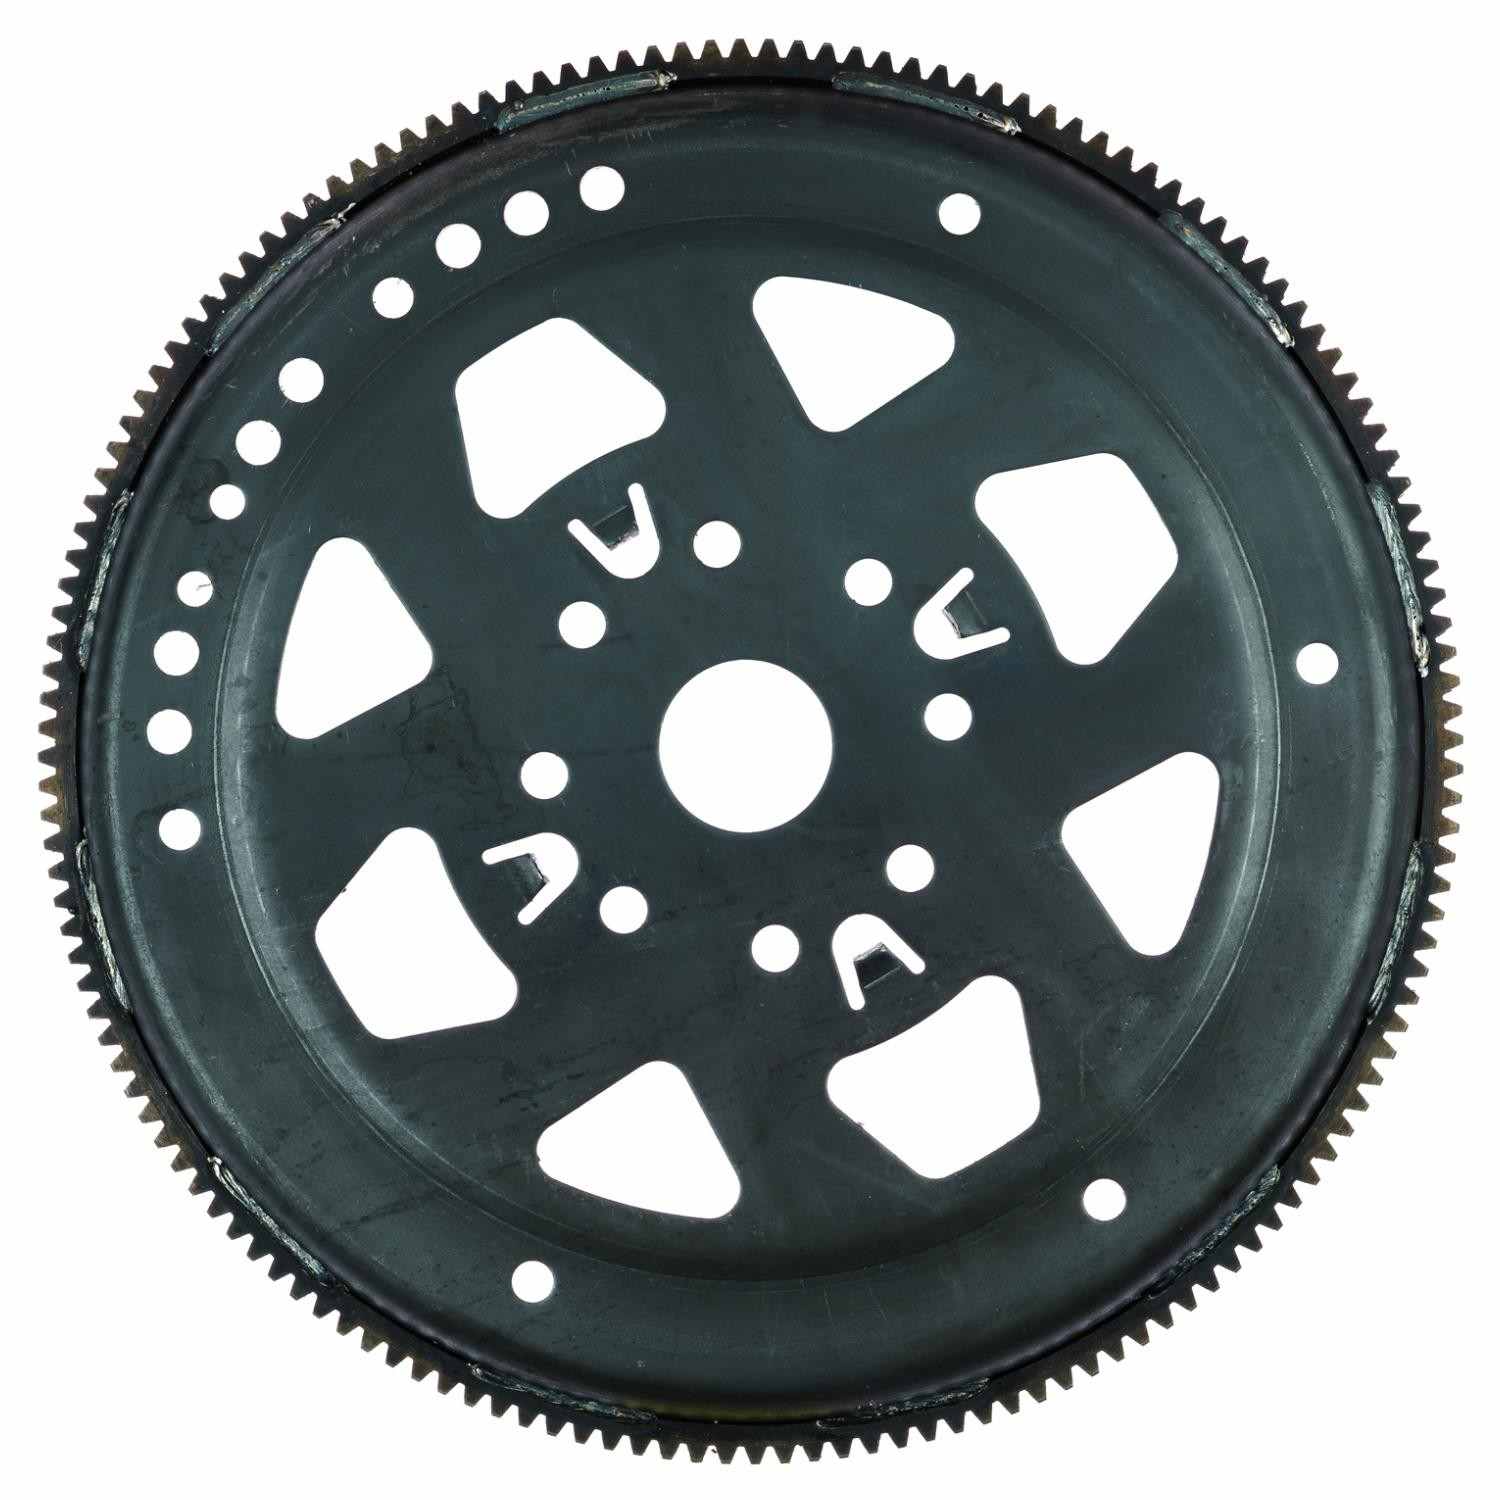 Left View of Automatic Transmission Flexplate PIONEER FRA-533